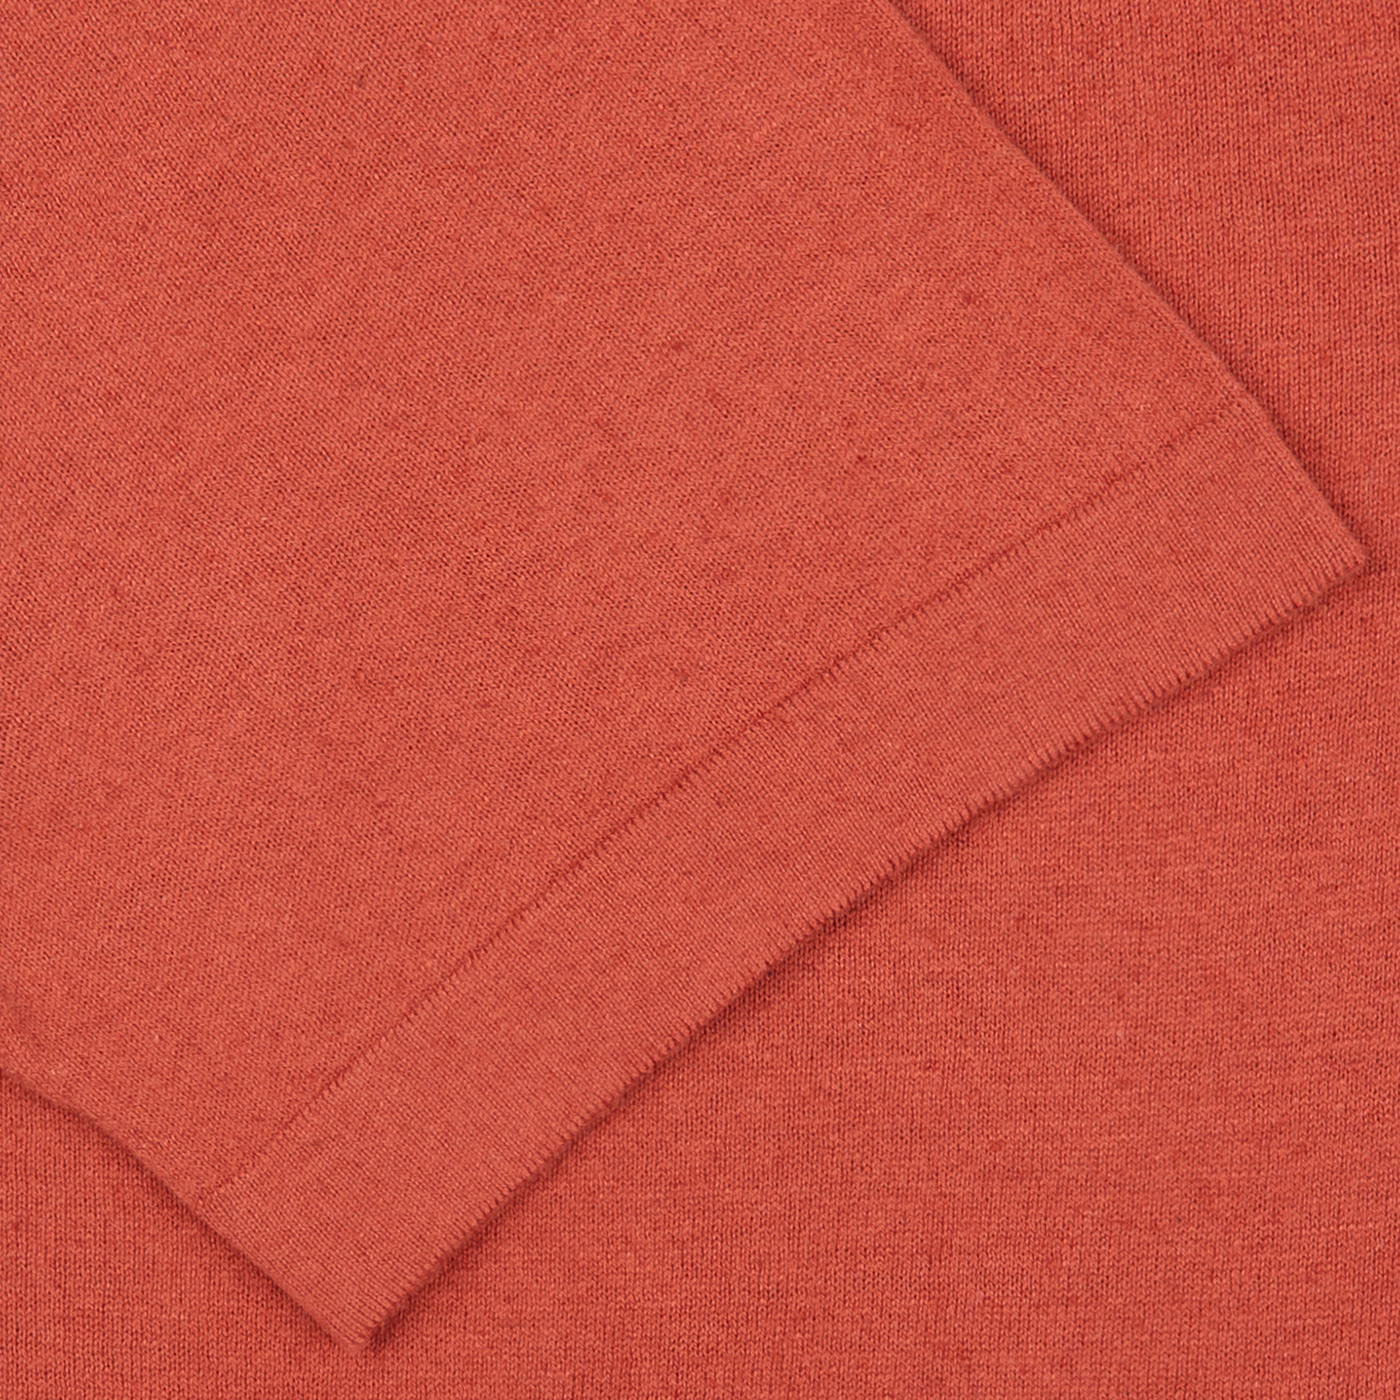 A close up of a Rust Red Cotton Linen Polo Shirt from G.R.P.